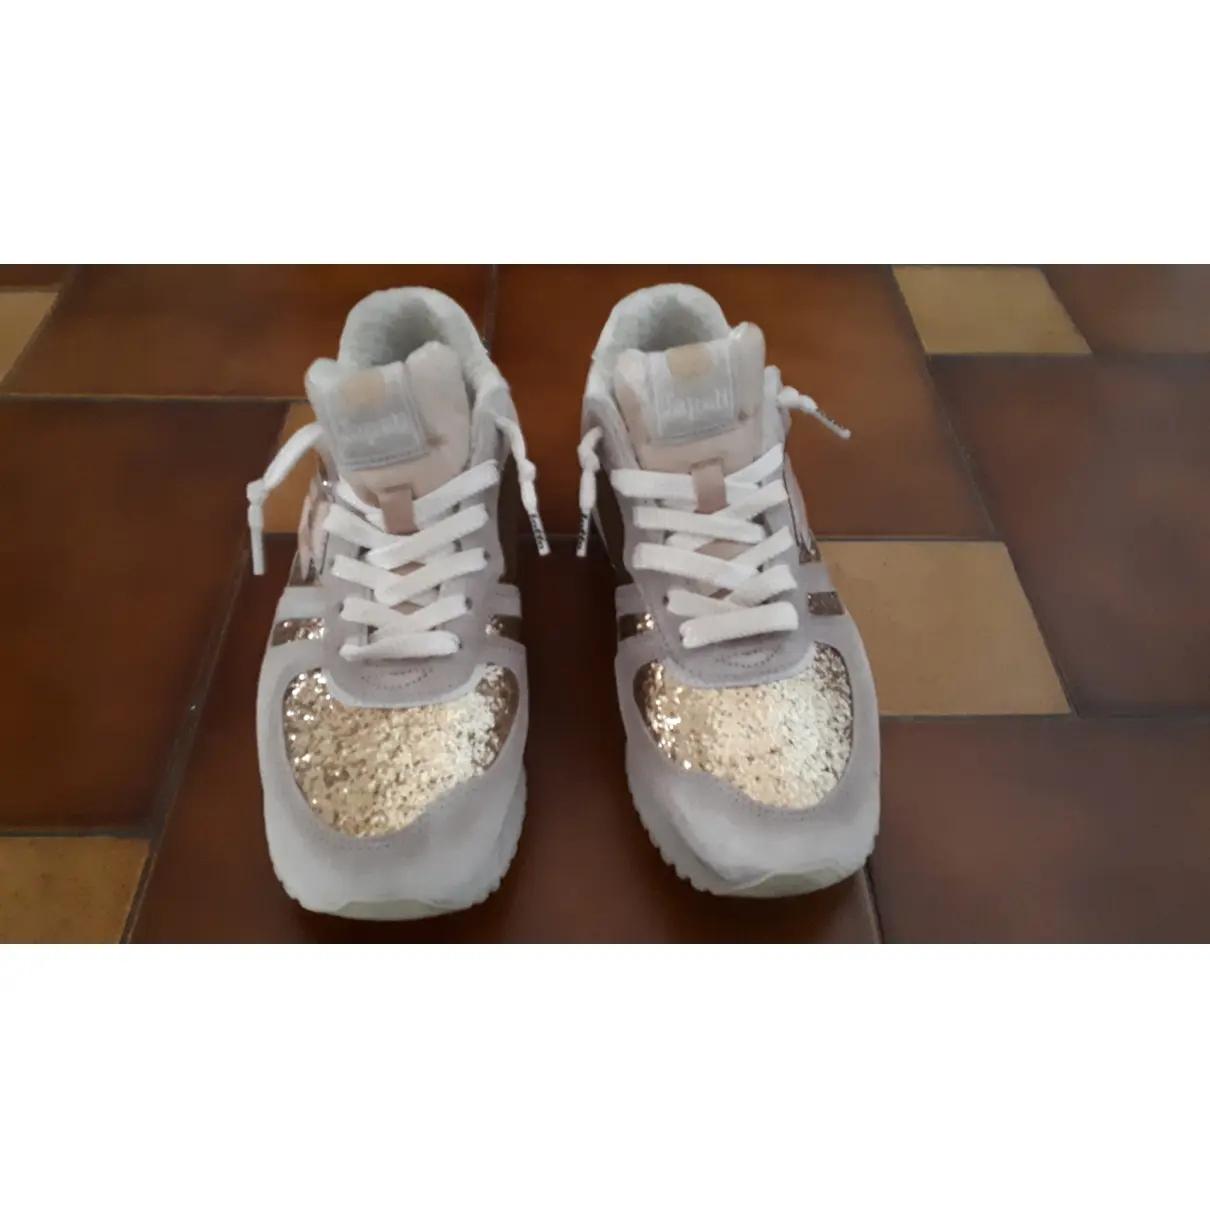 Buy LOTTO Glitter trainers online